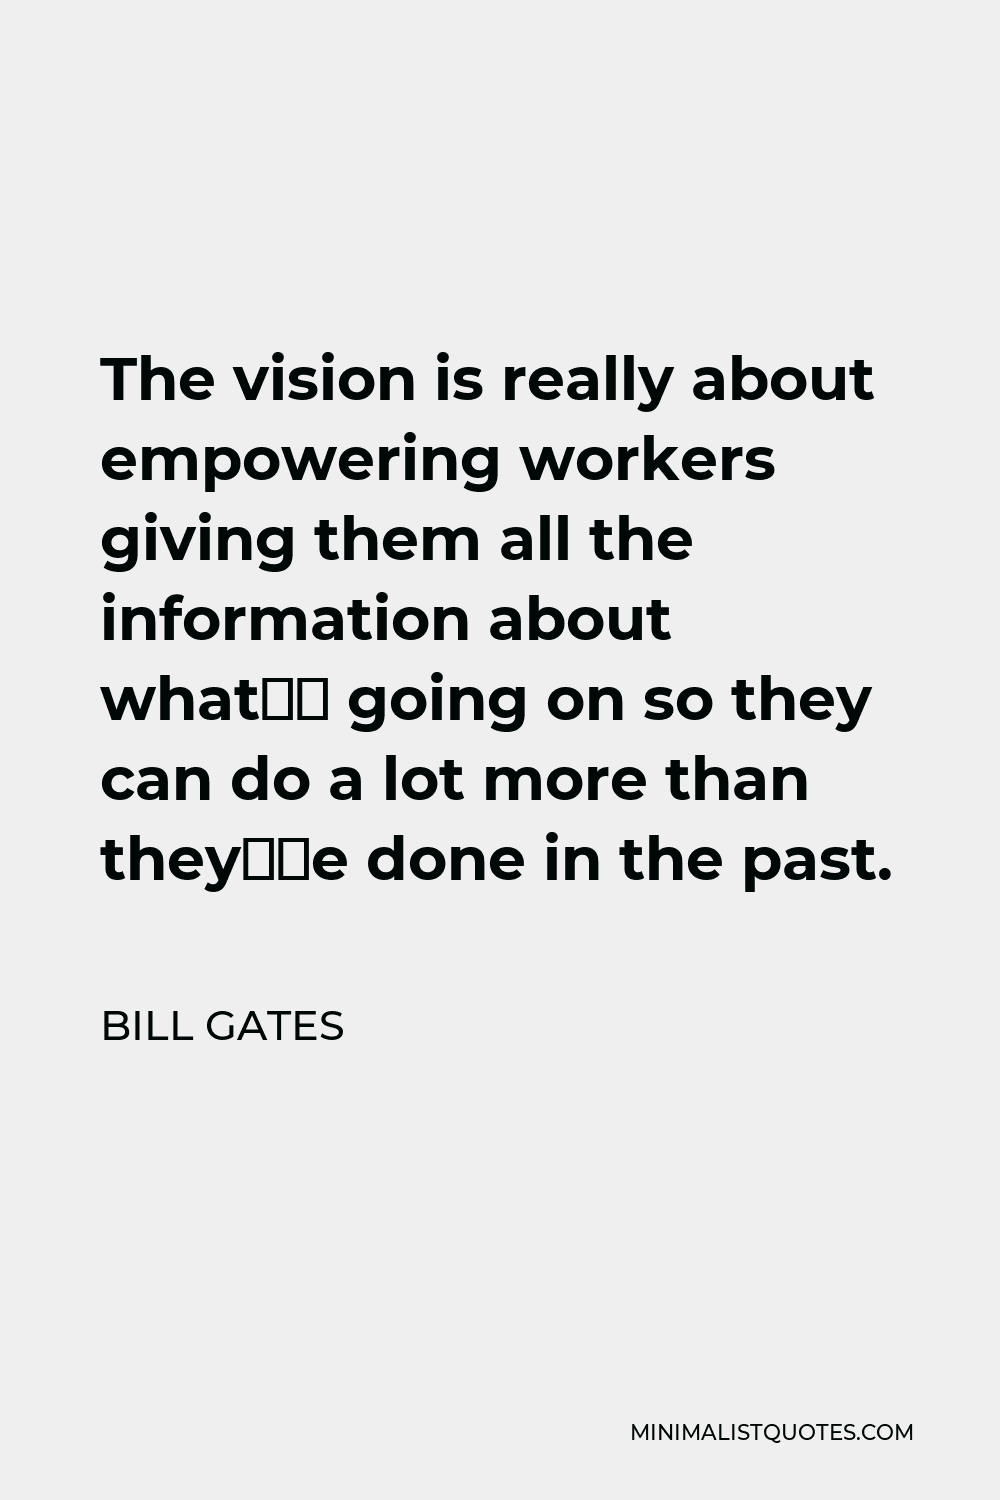 Bill Gates Quote - The vision is really about empowering workers giving them all the information about what’s going on so they can do a lot more than they’ve done in the past.